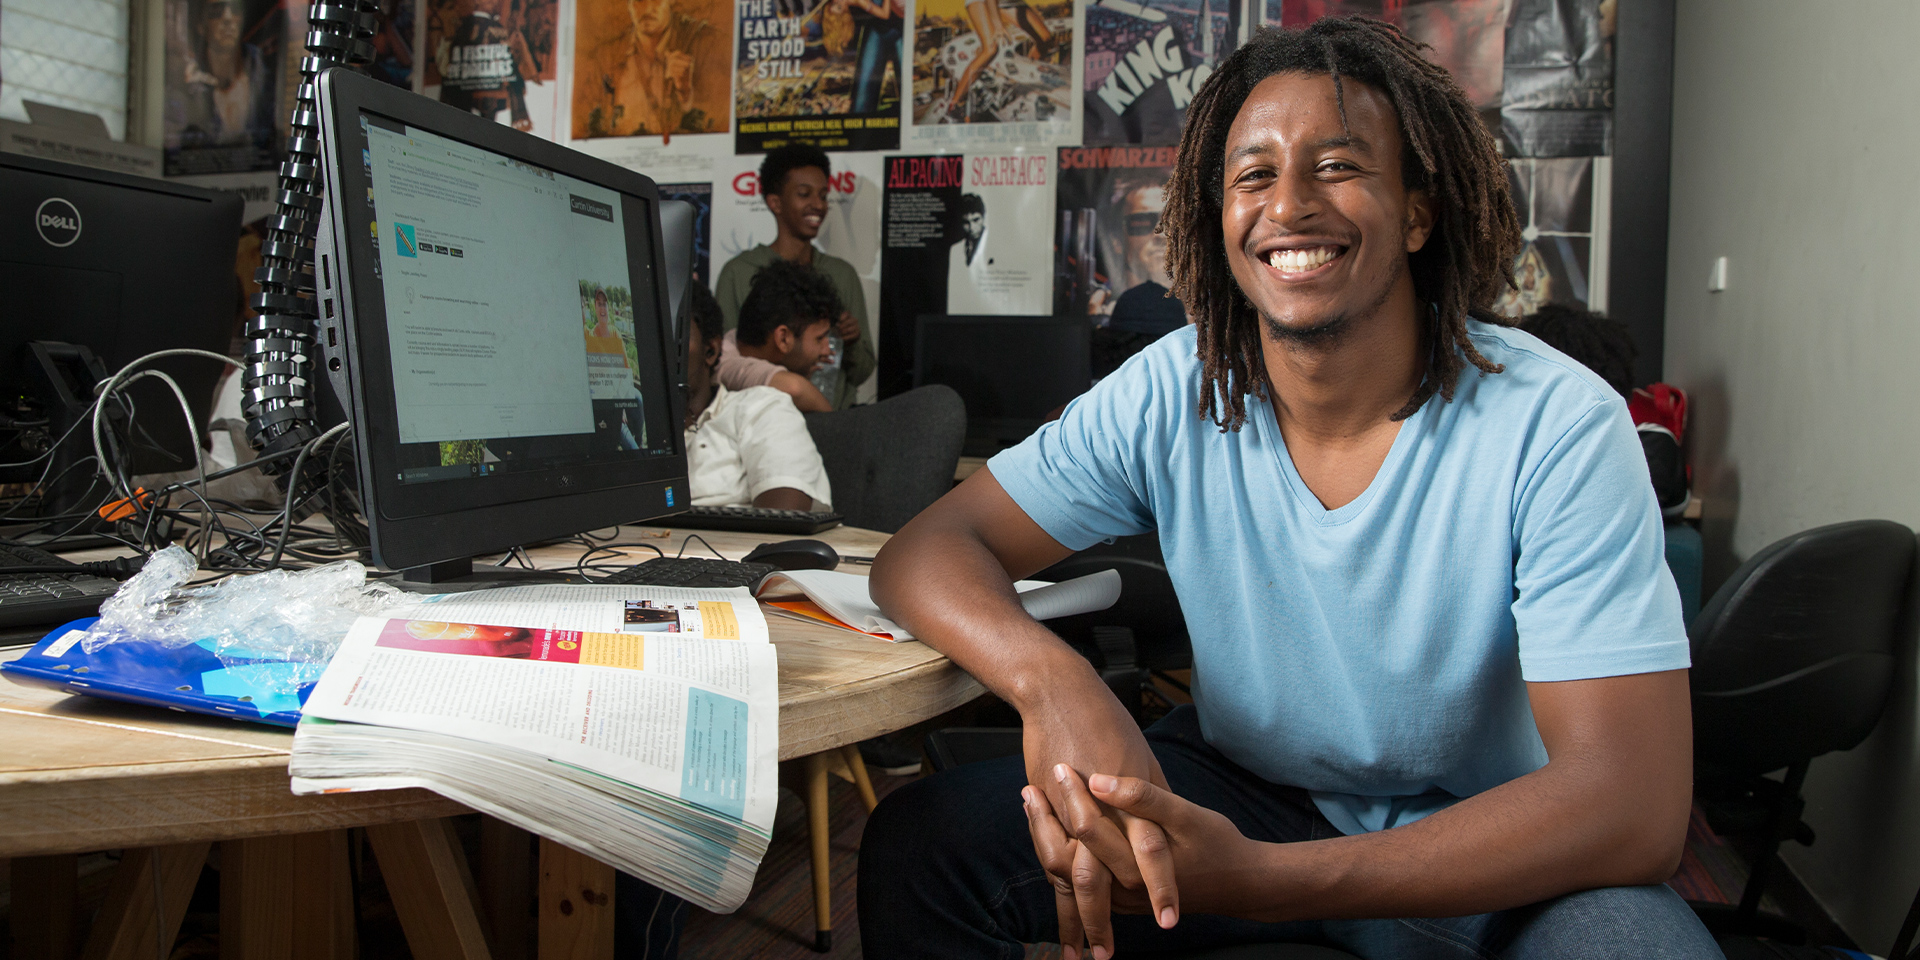 Student wearing a blue t-shirt smiles next to a computer